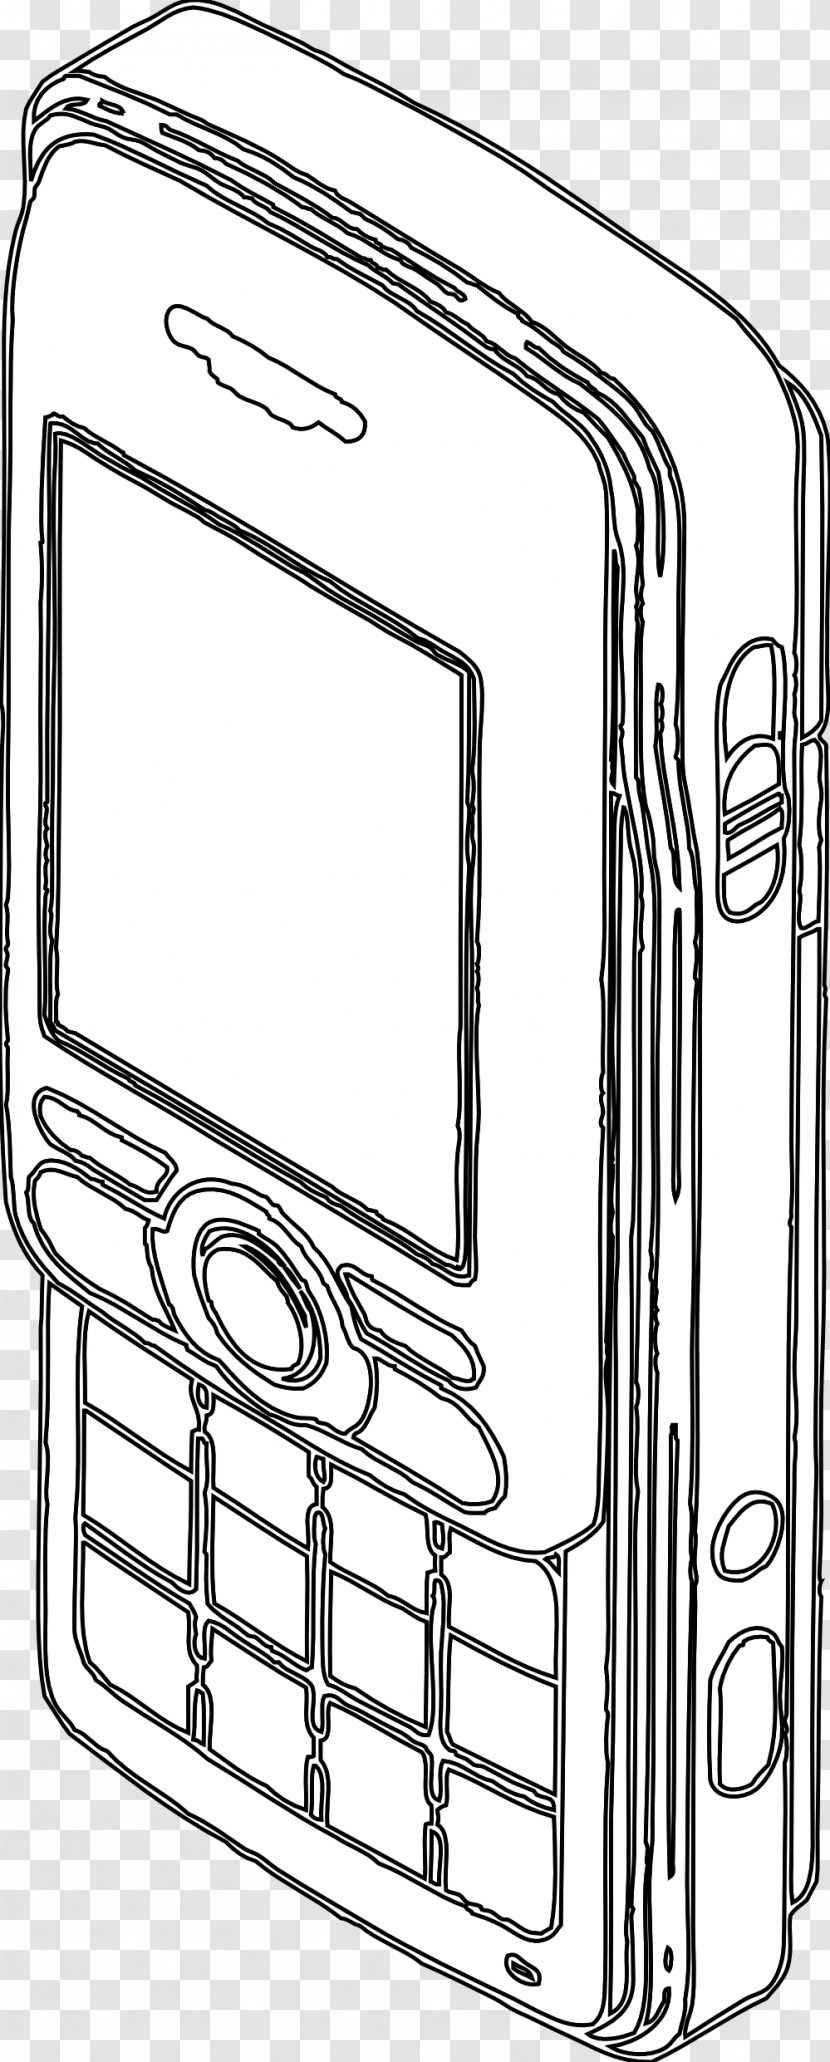 Coloring Book IPhone Line Art Text Messaging - Area - Iphone Transparent PNG